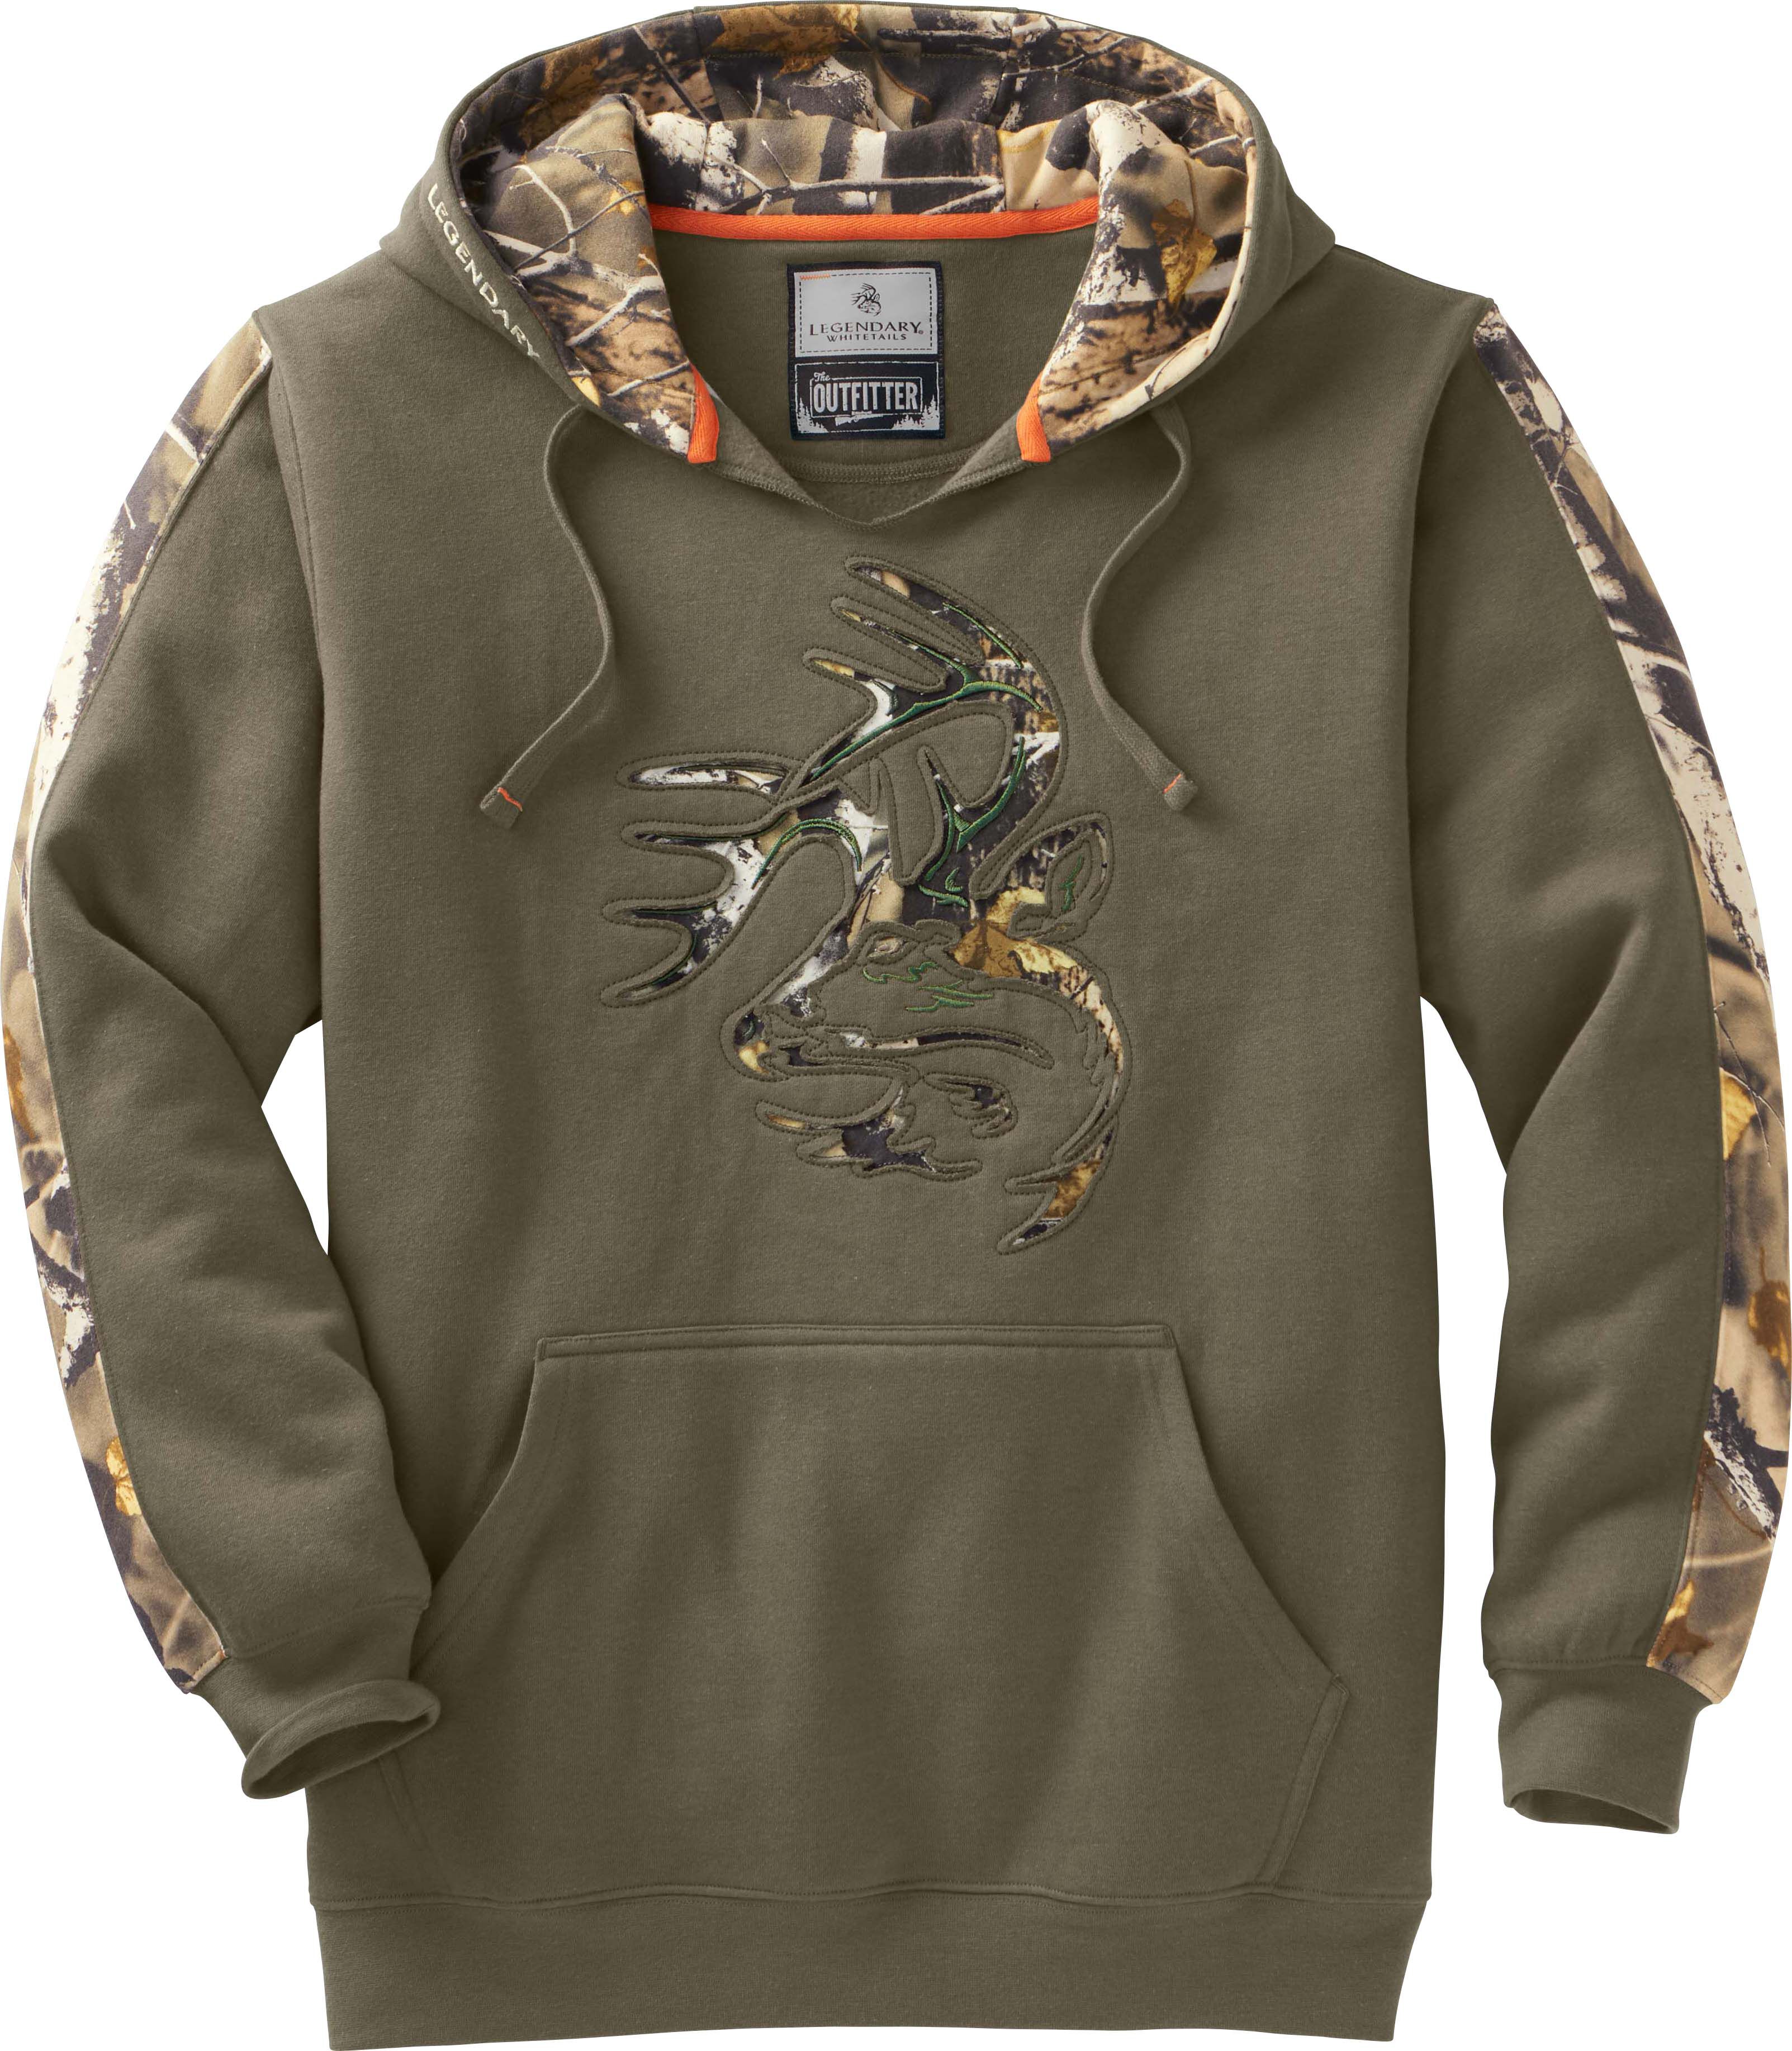 Legendary Whitetails MEN'S CAMO OUTFITTER HOODIE Onyx 